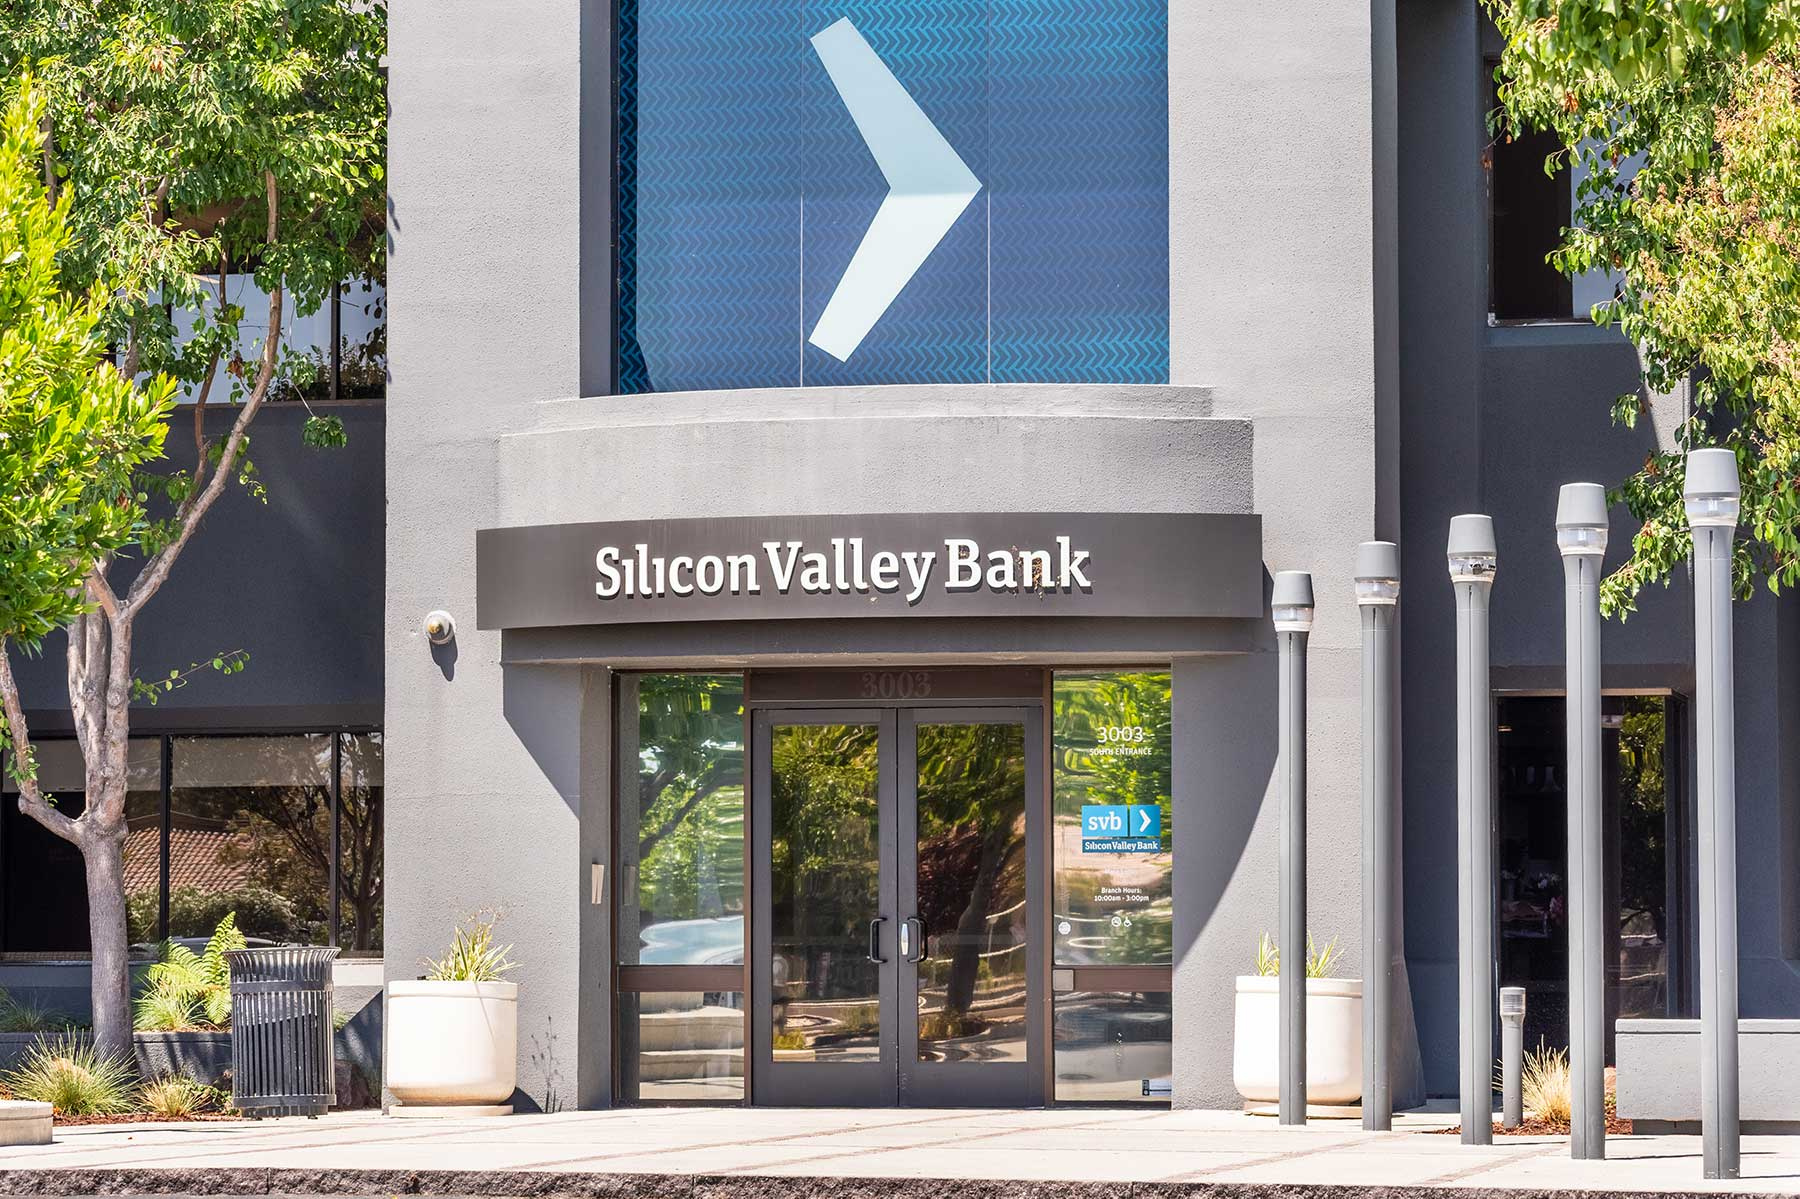 Silicon Valley Bank placed some risky bets, but climate tech wasn’t one of them.